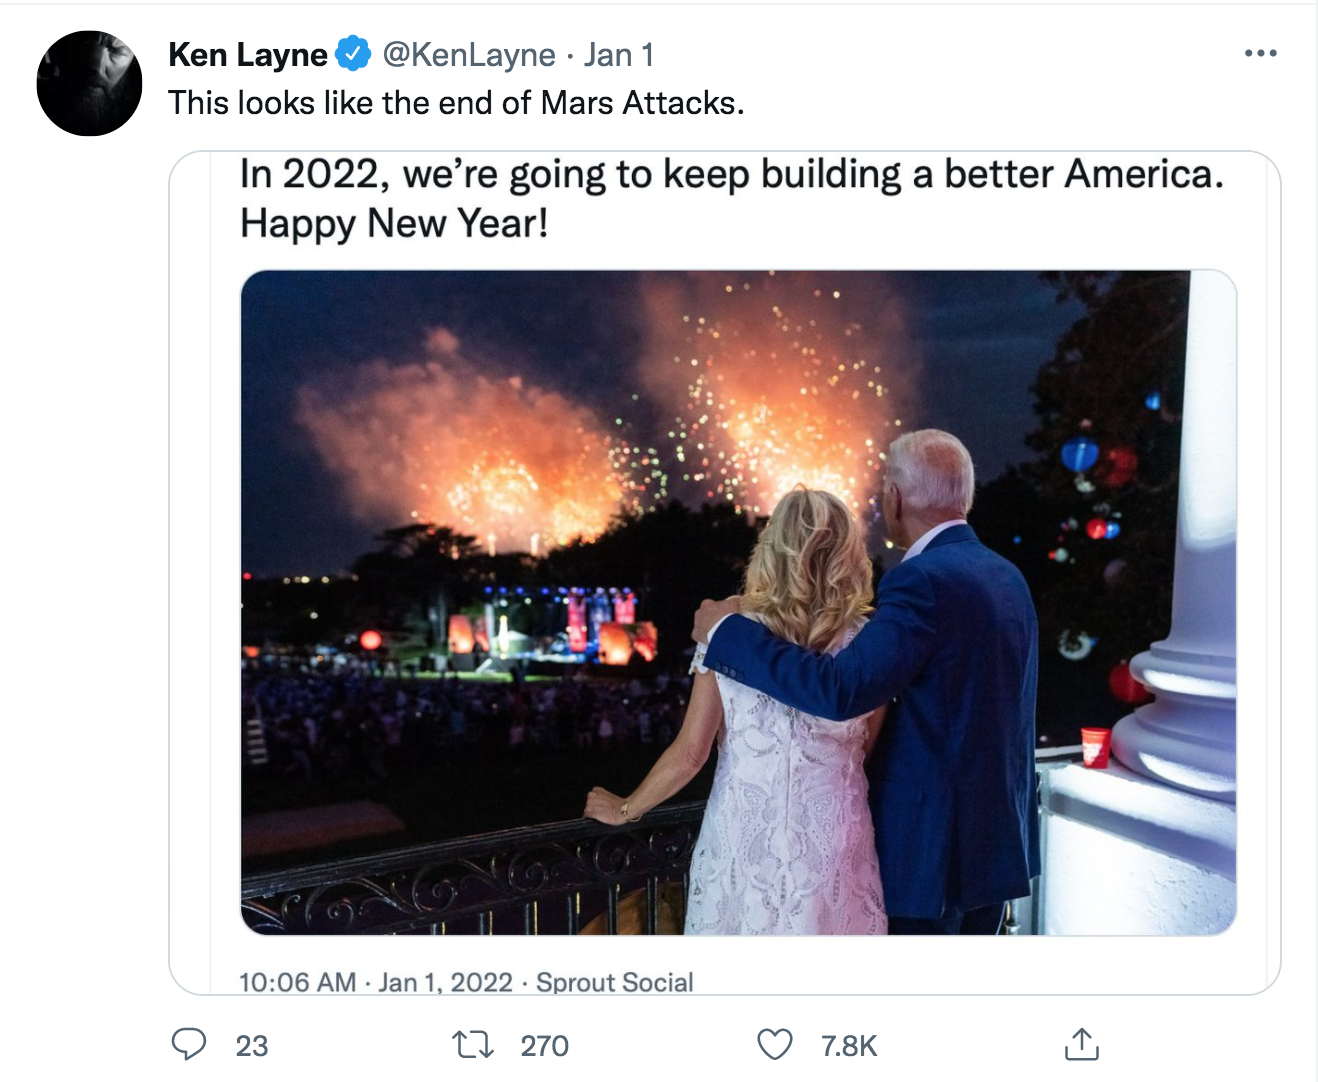 wtf tweets - photo caption - Ken Layne Jan 1 This looks the end of Mars Attacks. In 2022, we're going to keep building a better America. Happy New Year! Sprout Social 23 12 270 o